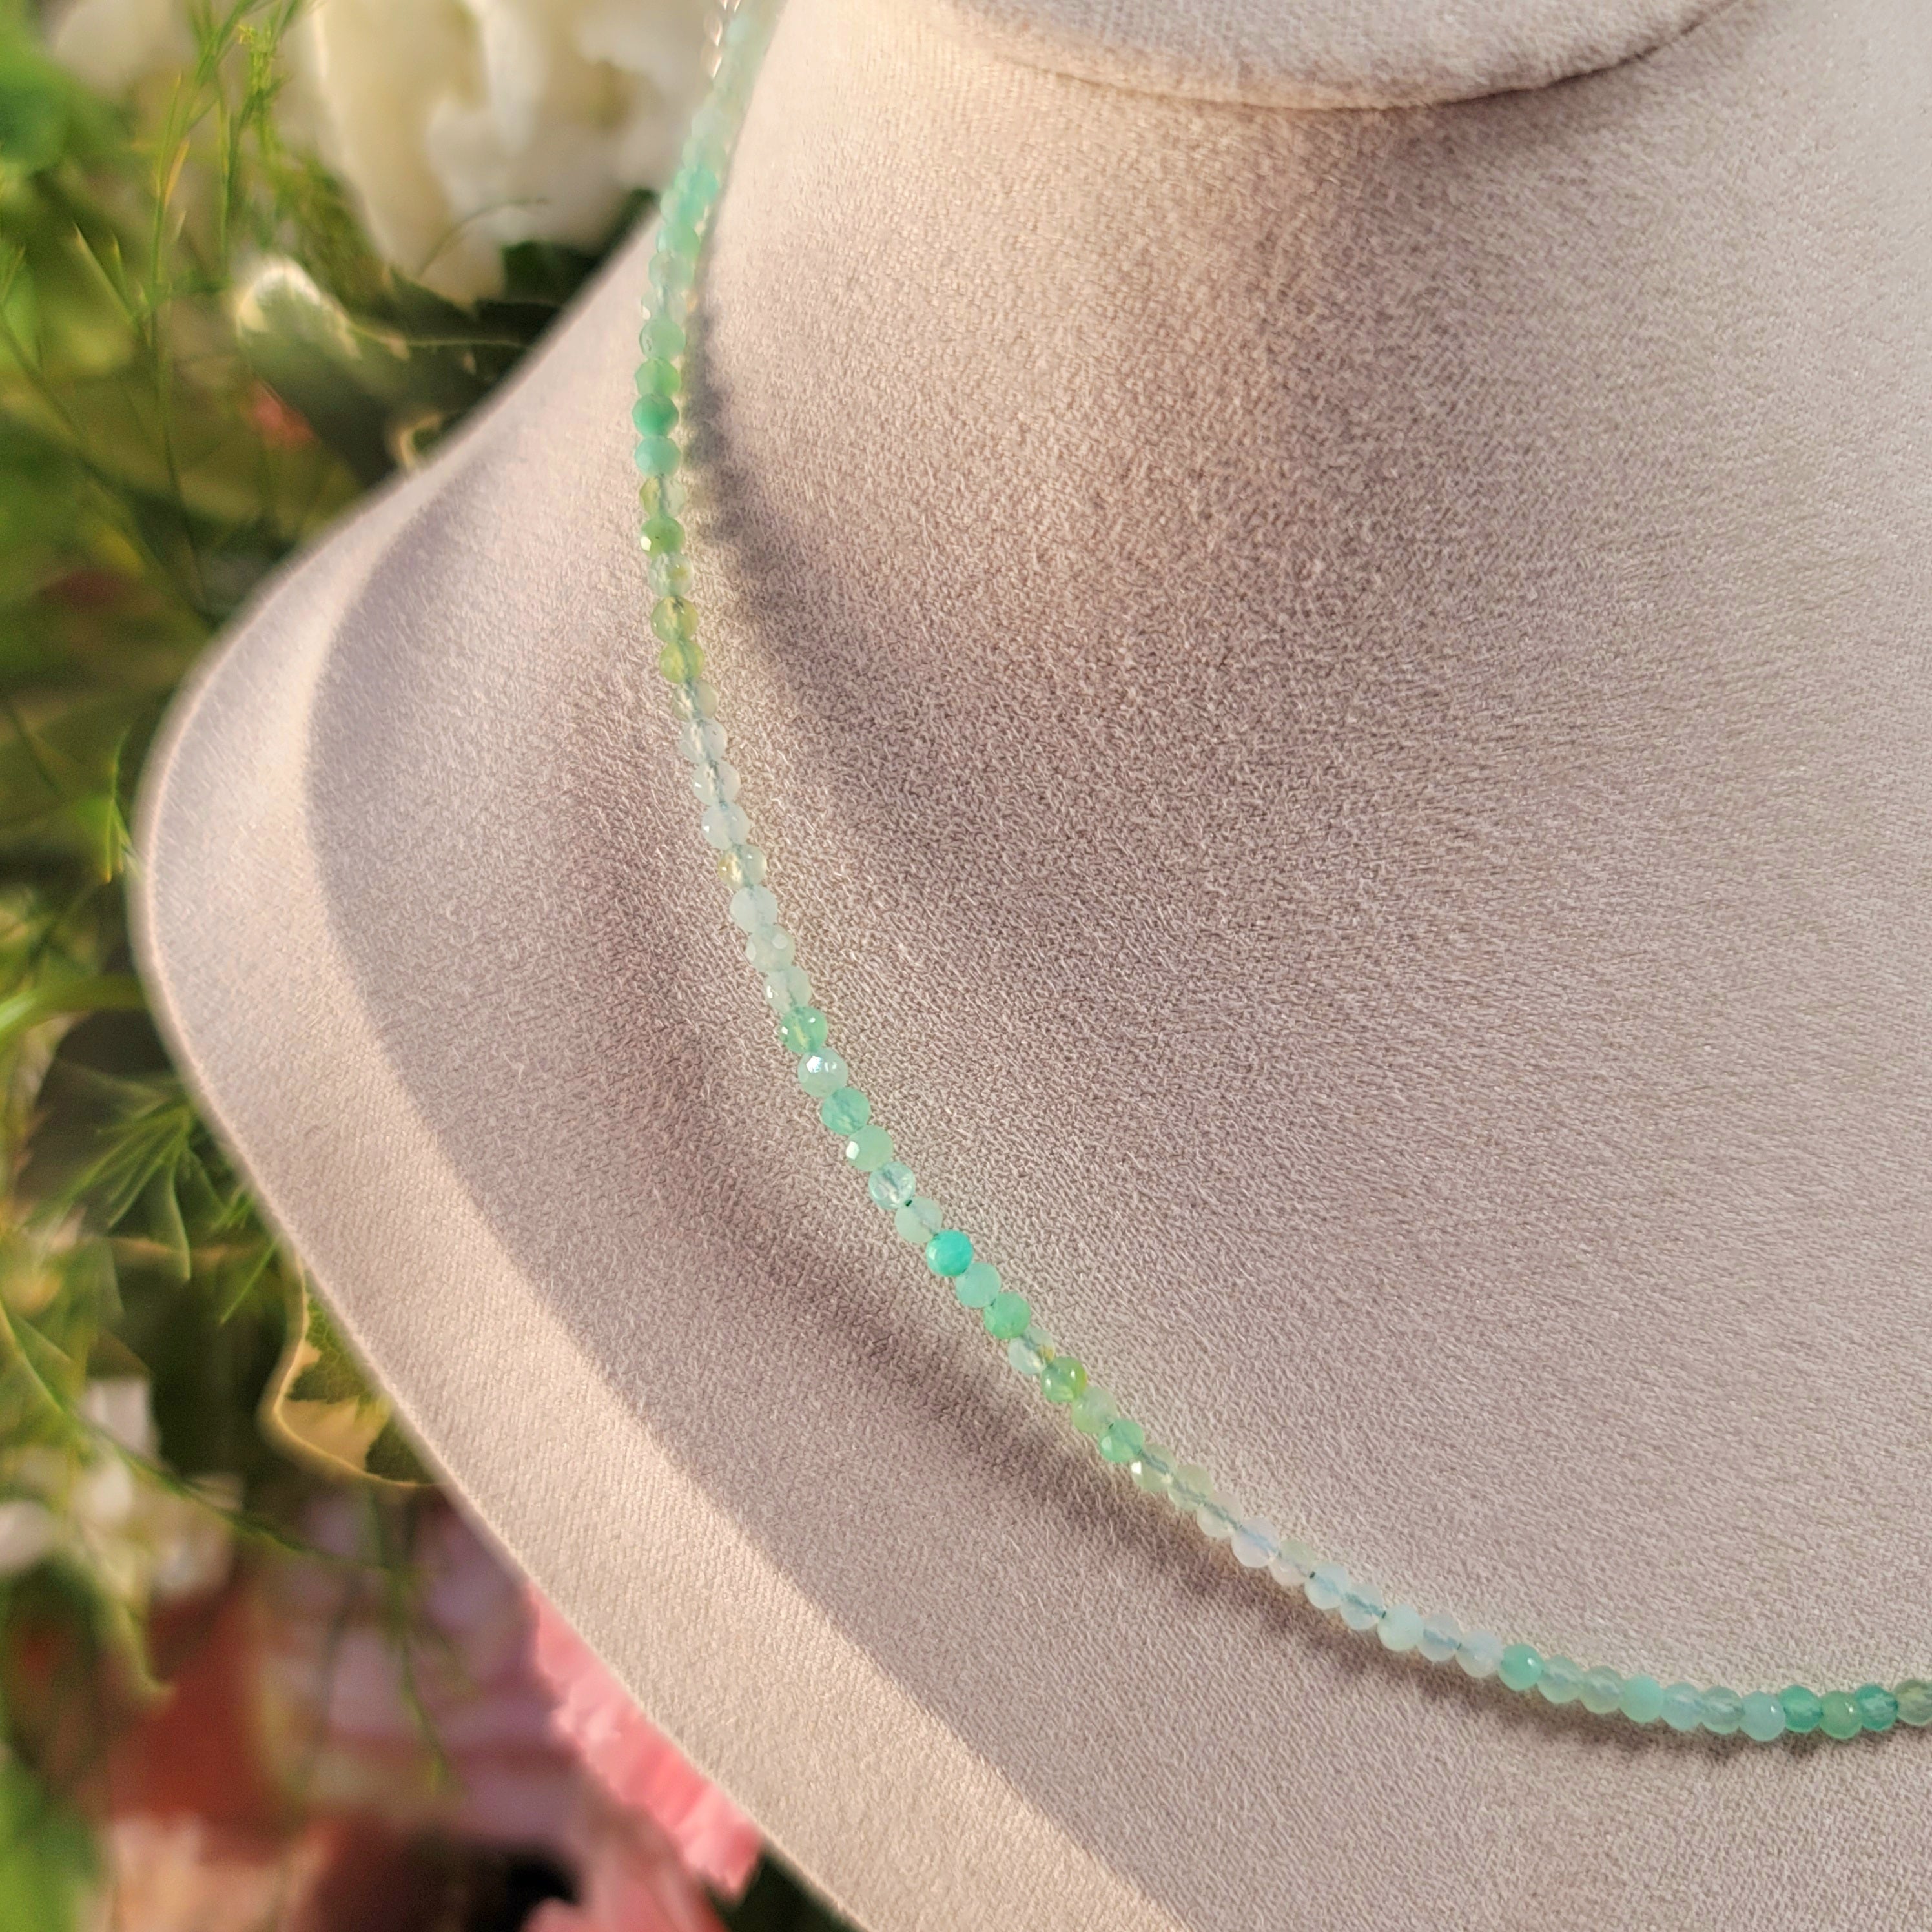 Chrysoprase Micro Faceted Choker/Layering Necklace for Abundance, Love and Wealth